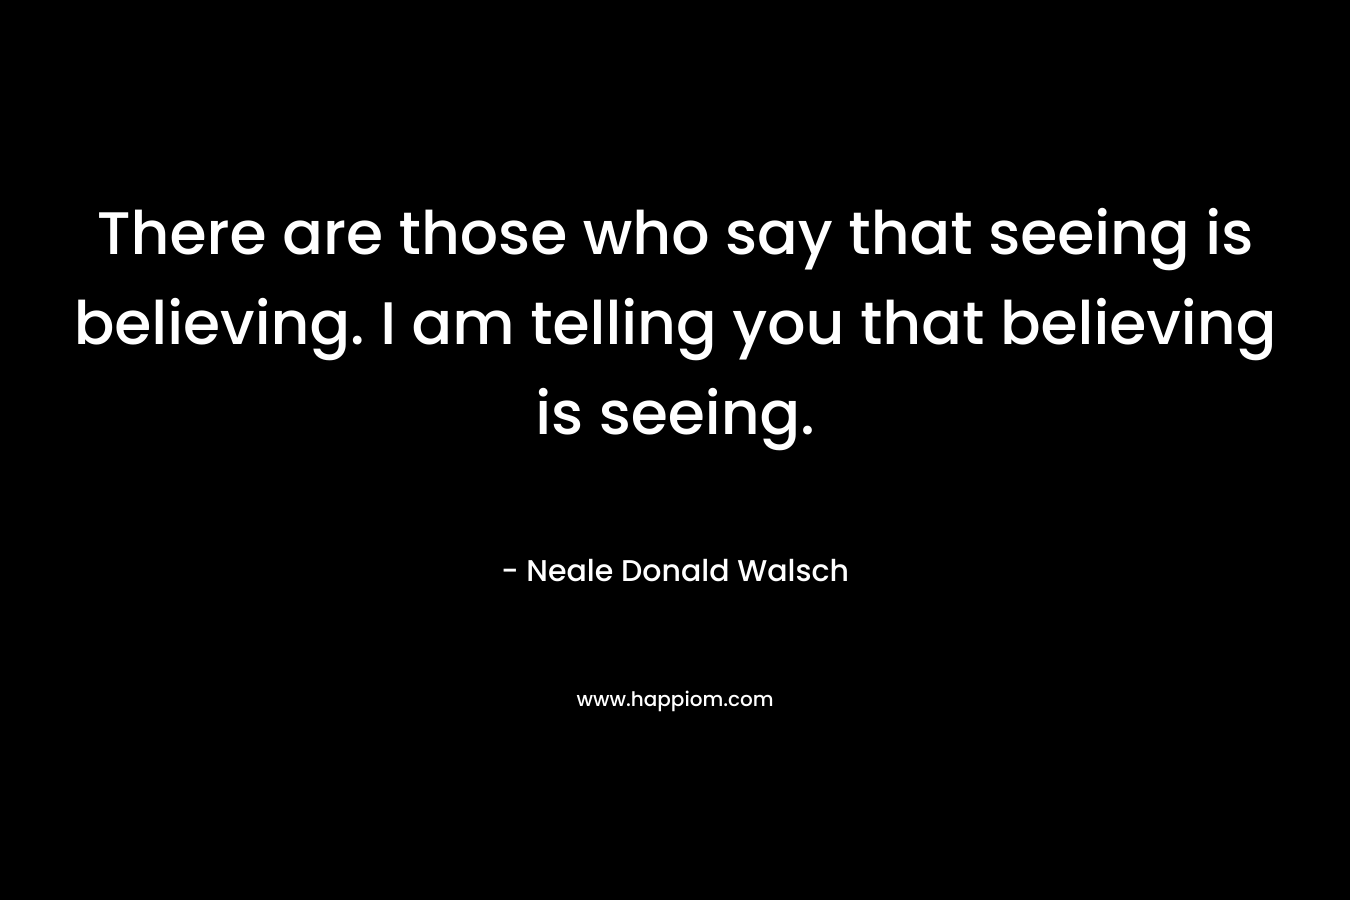 There are those who say that seeing is believing. I am telling you that believing is seeing.